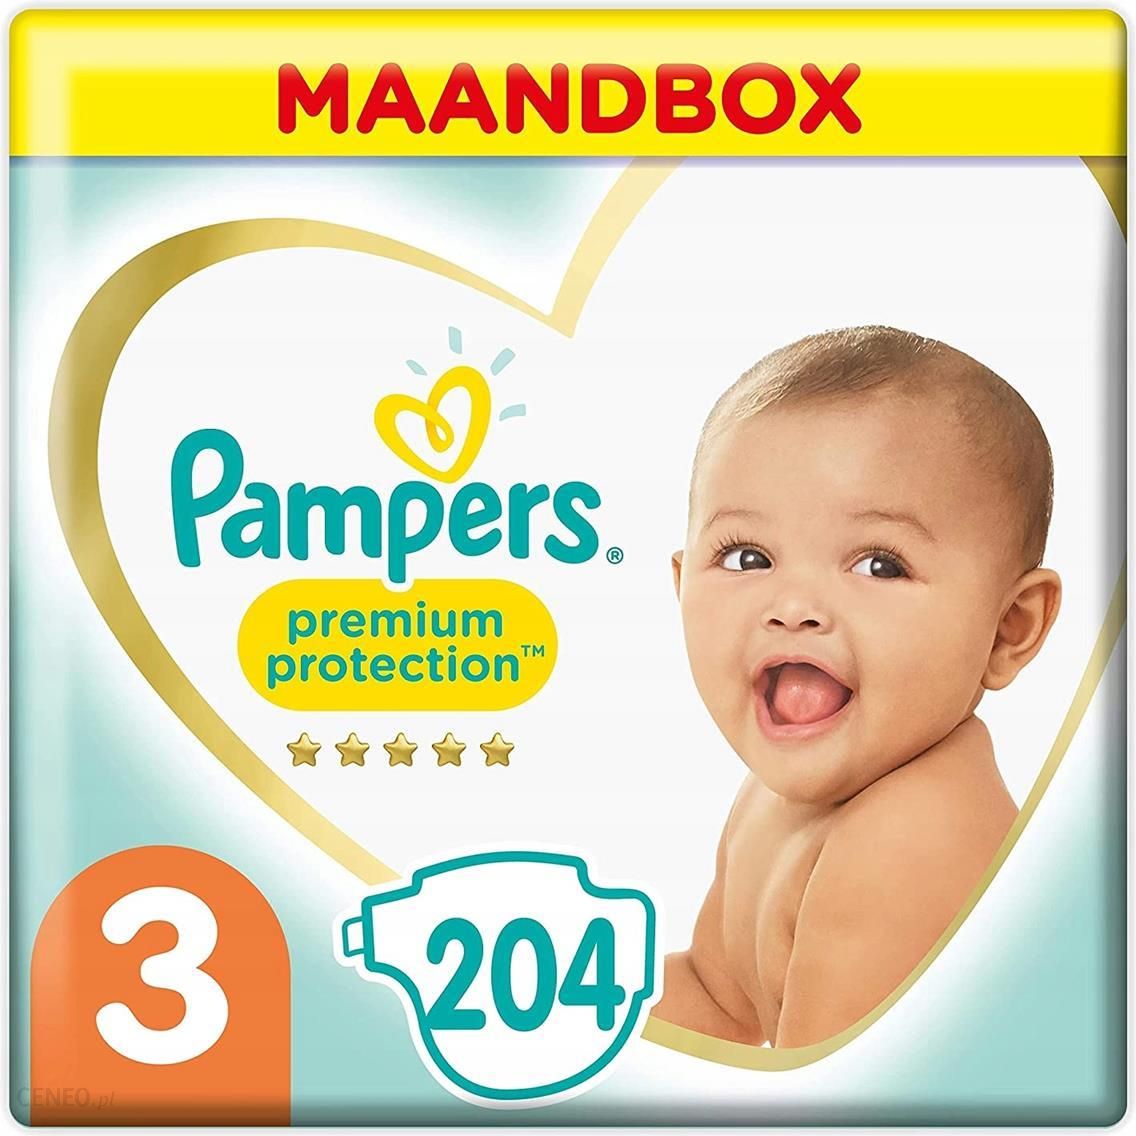 selgros pampers active rossmann